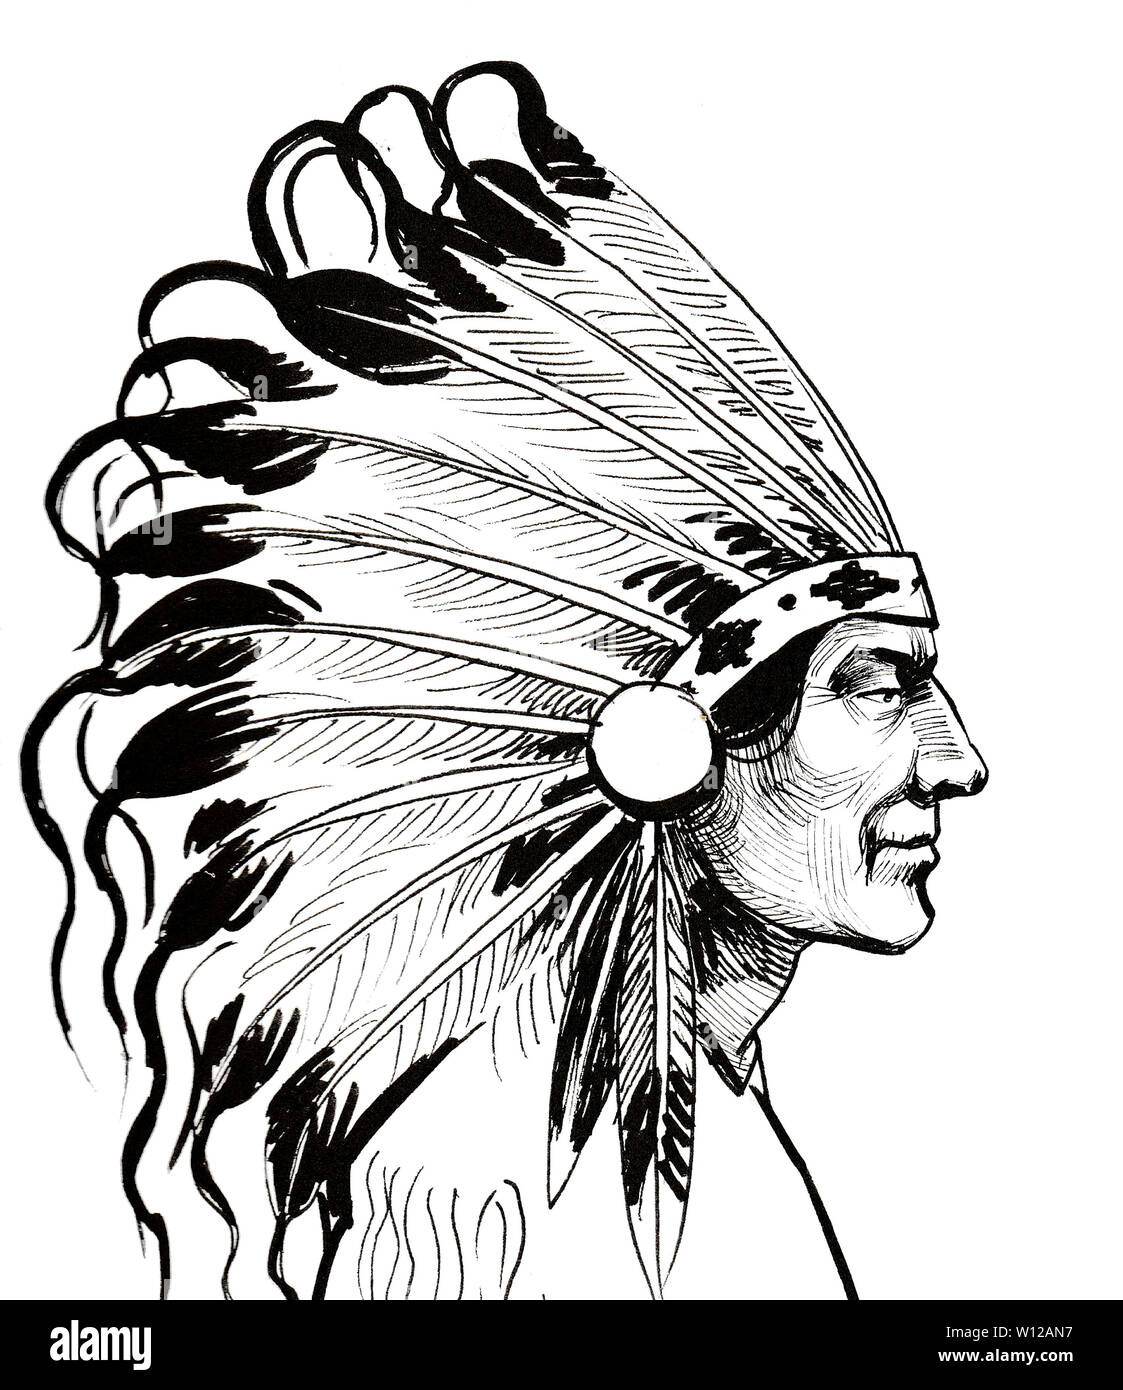 Native American chief. Ink black and white drawing Stock Photo